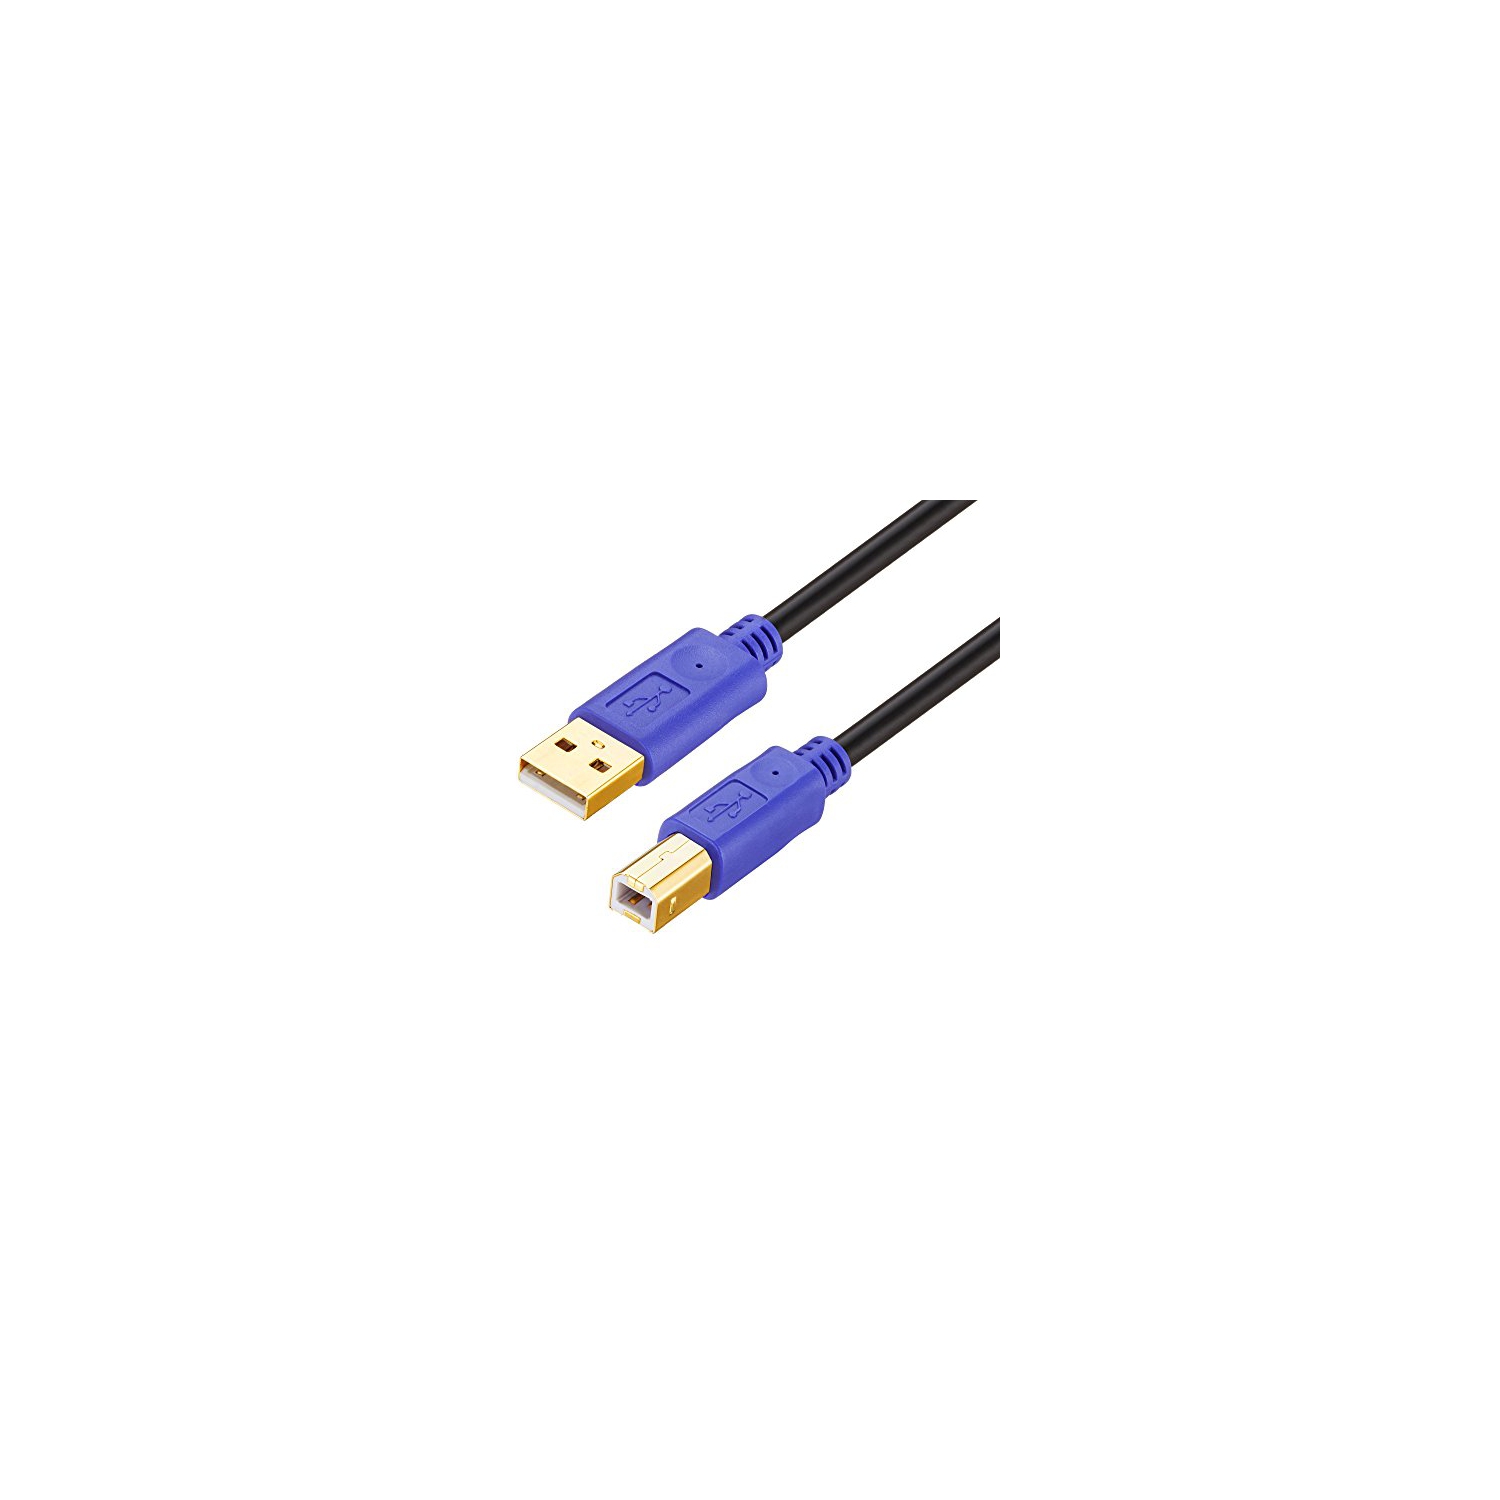 Printer Cable 10ft, LiuTian USB Printer Cable Type A Male to B Male Scanner Cord USB B Cable High Speed for HP, Canon,